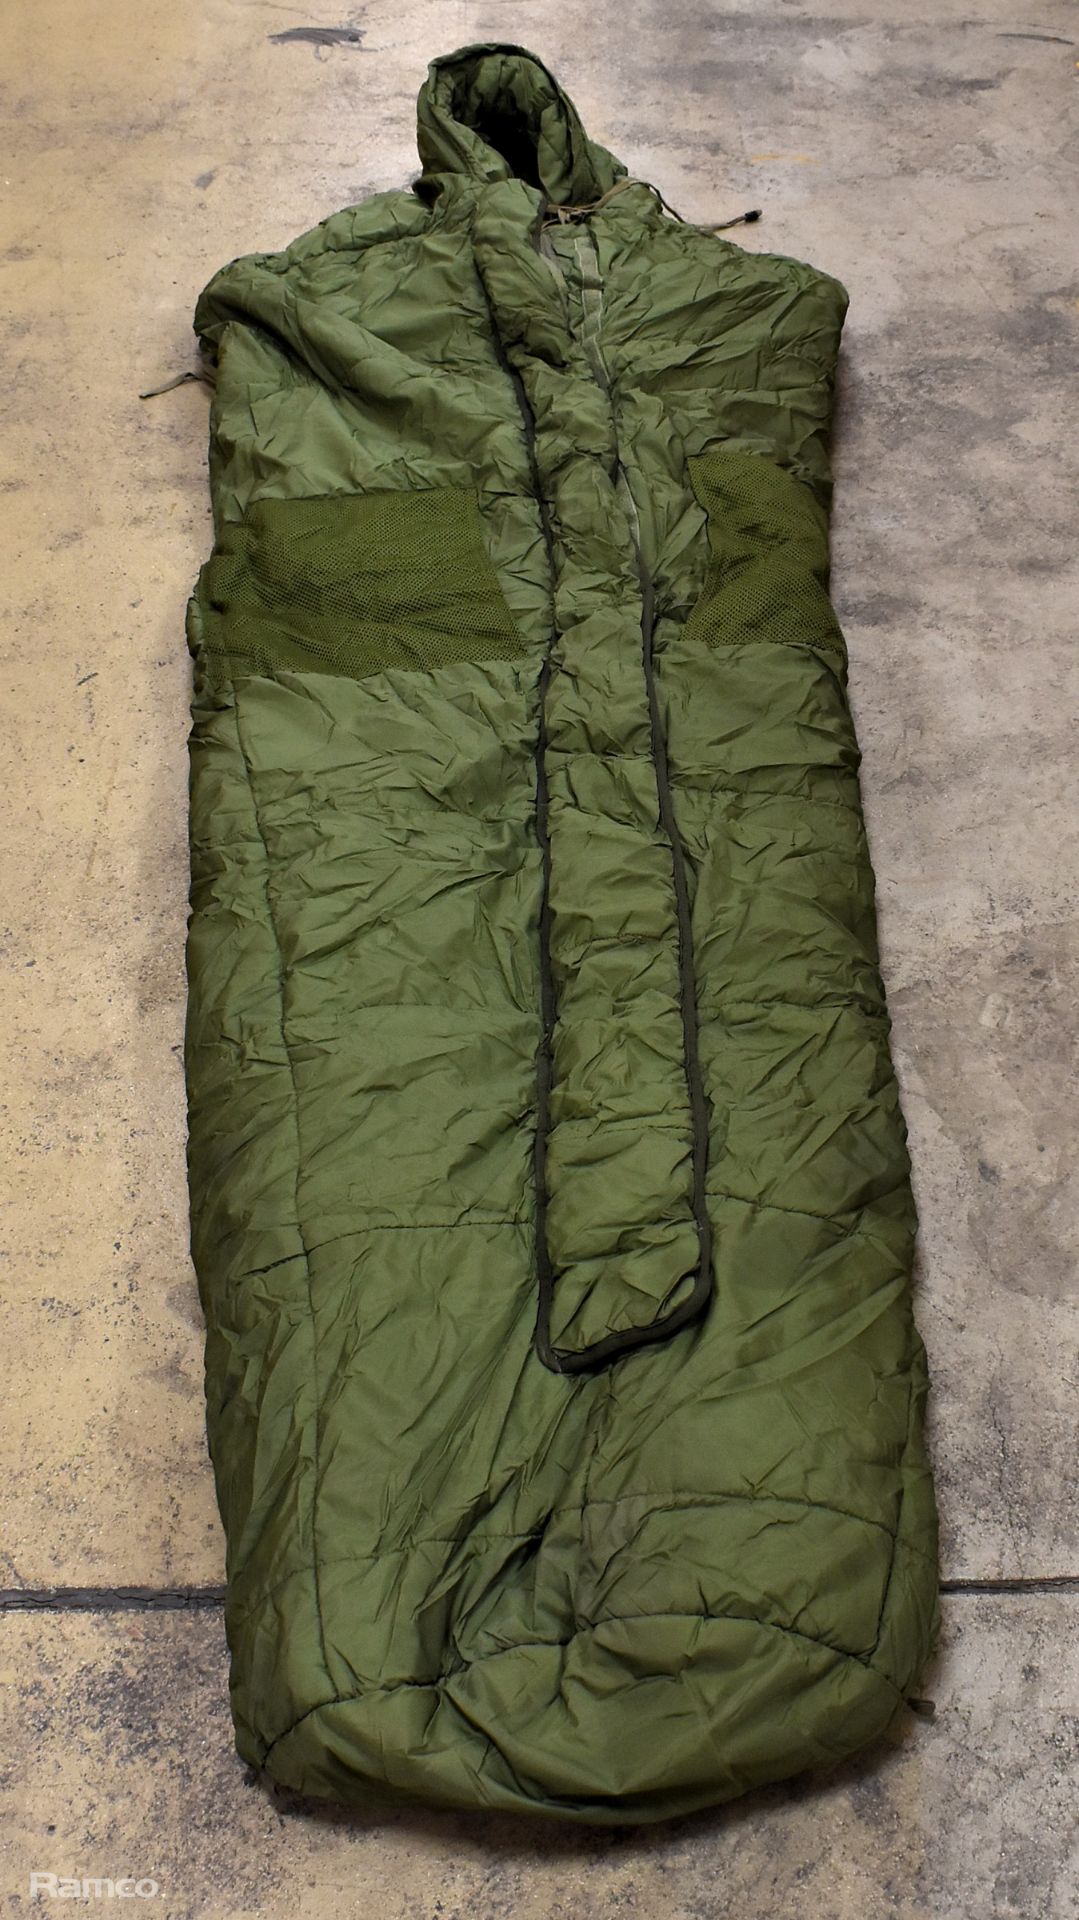 50x Sleeping bags - mixed grades and sizes - Image 2 of 8